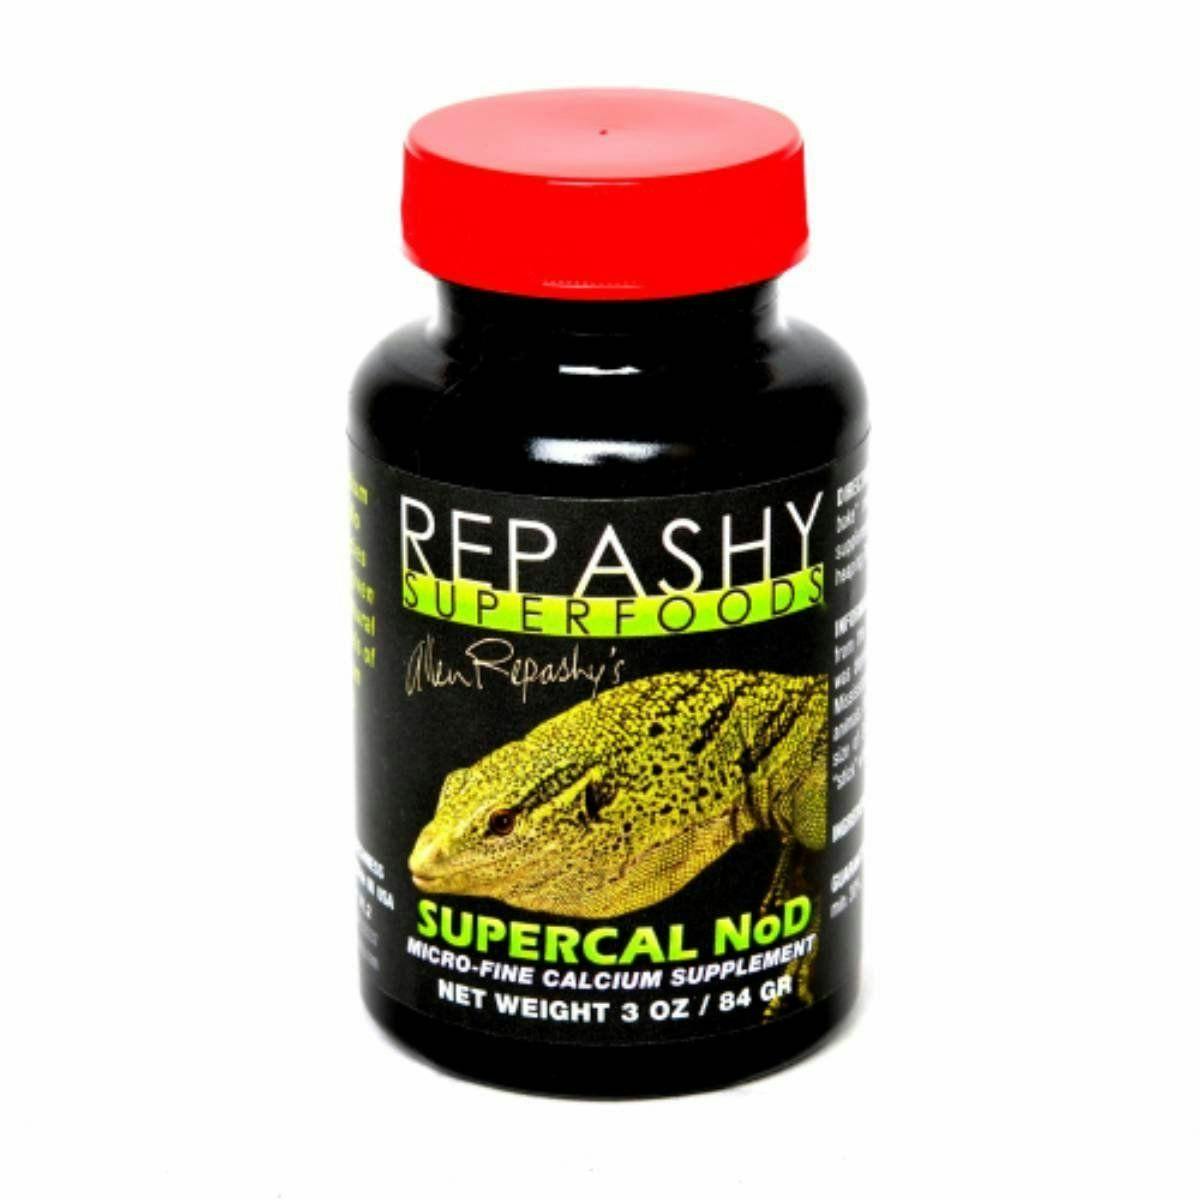 Image for Repashy Supercal NoD (3 oz Jar) by Josh's Frogs